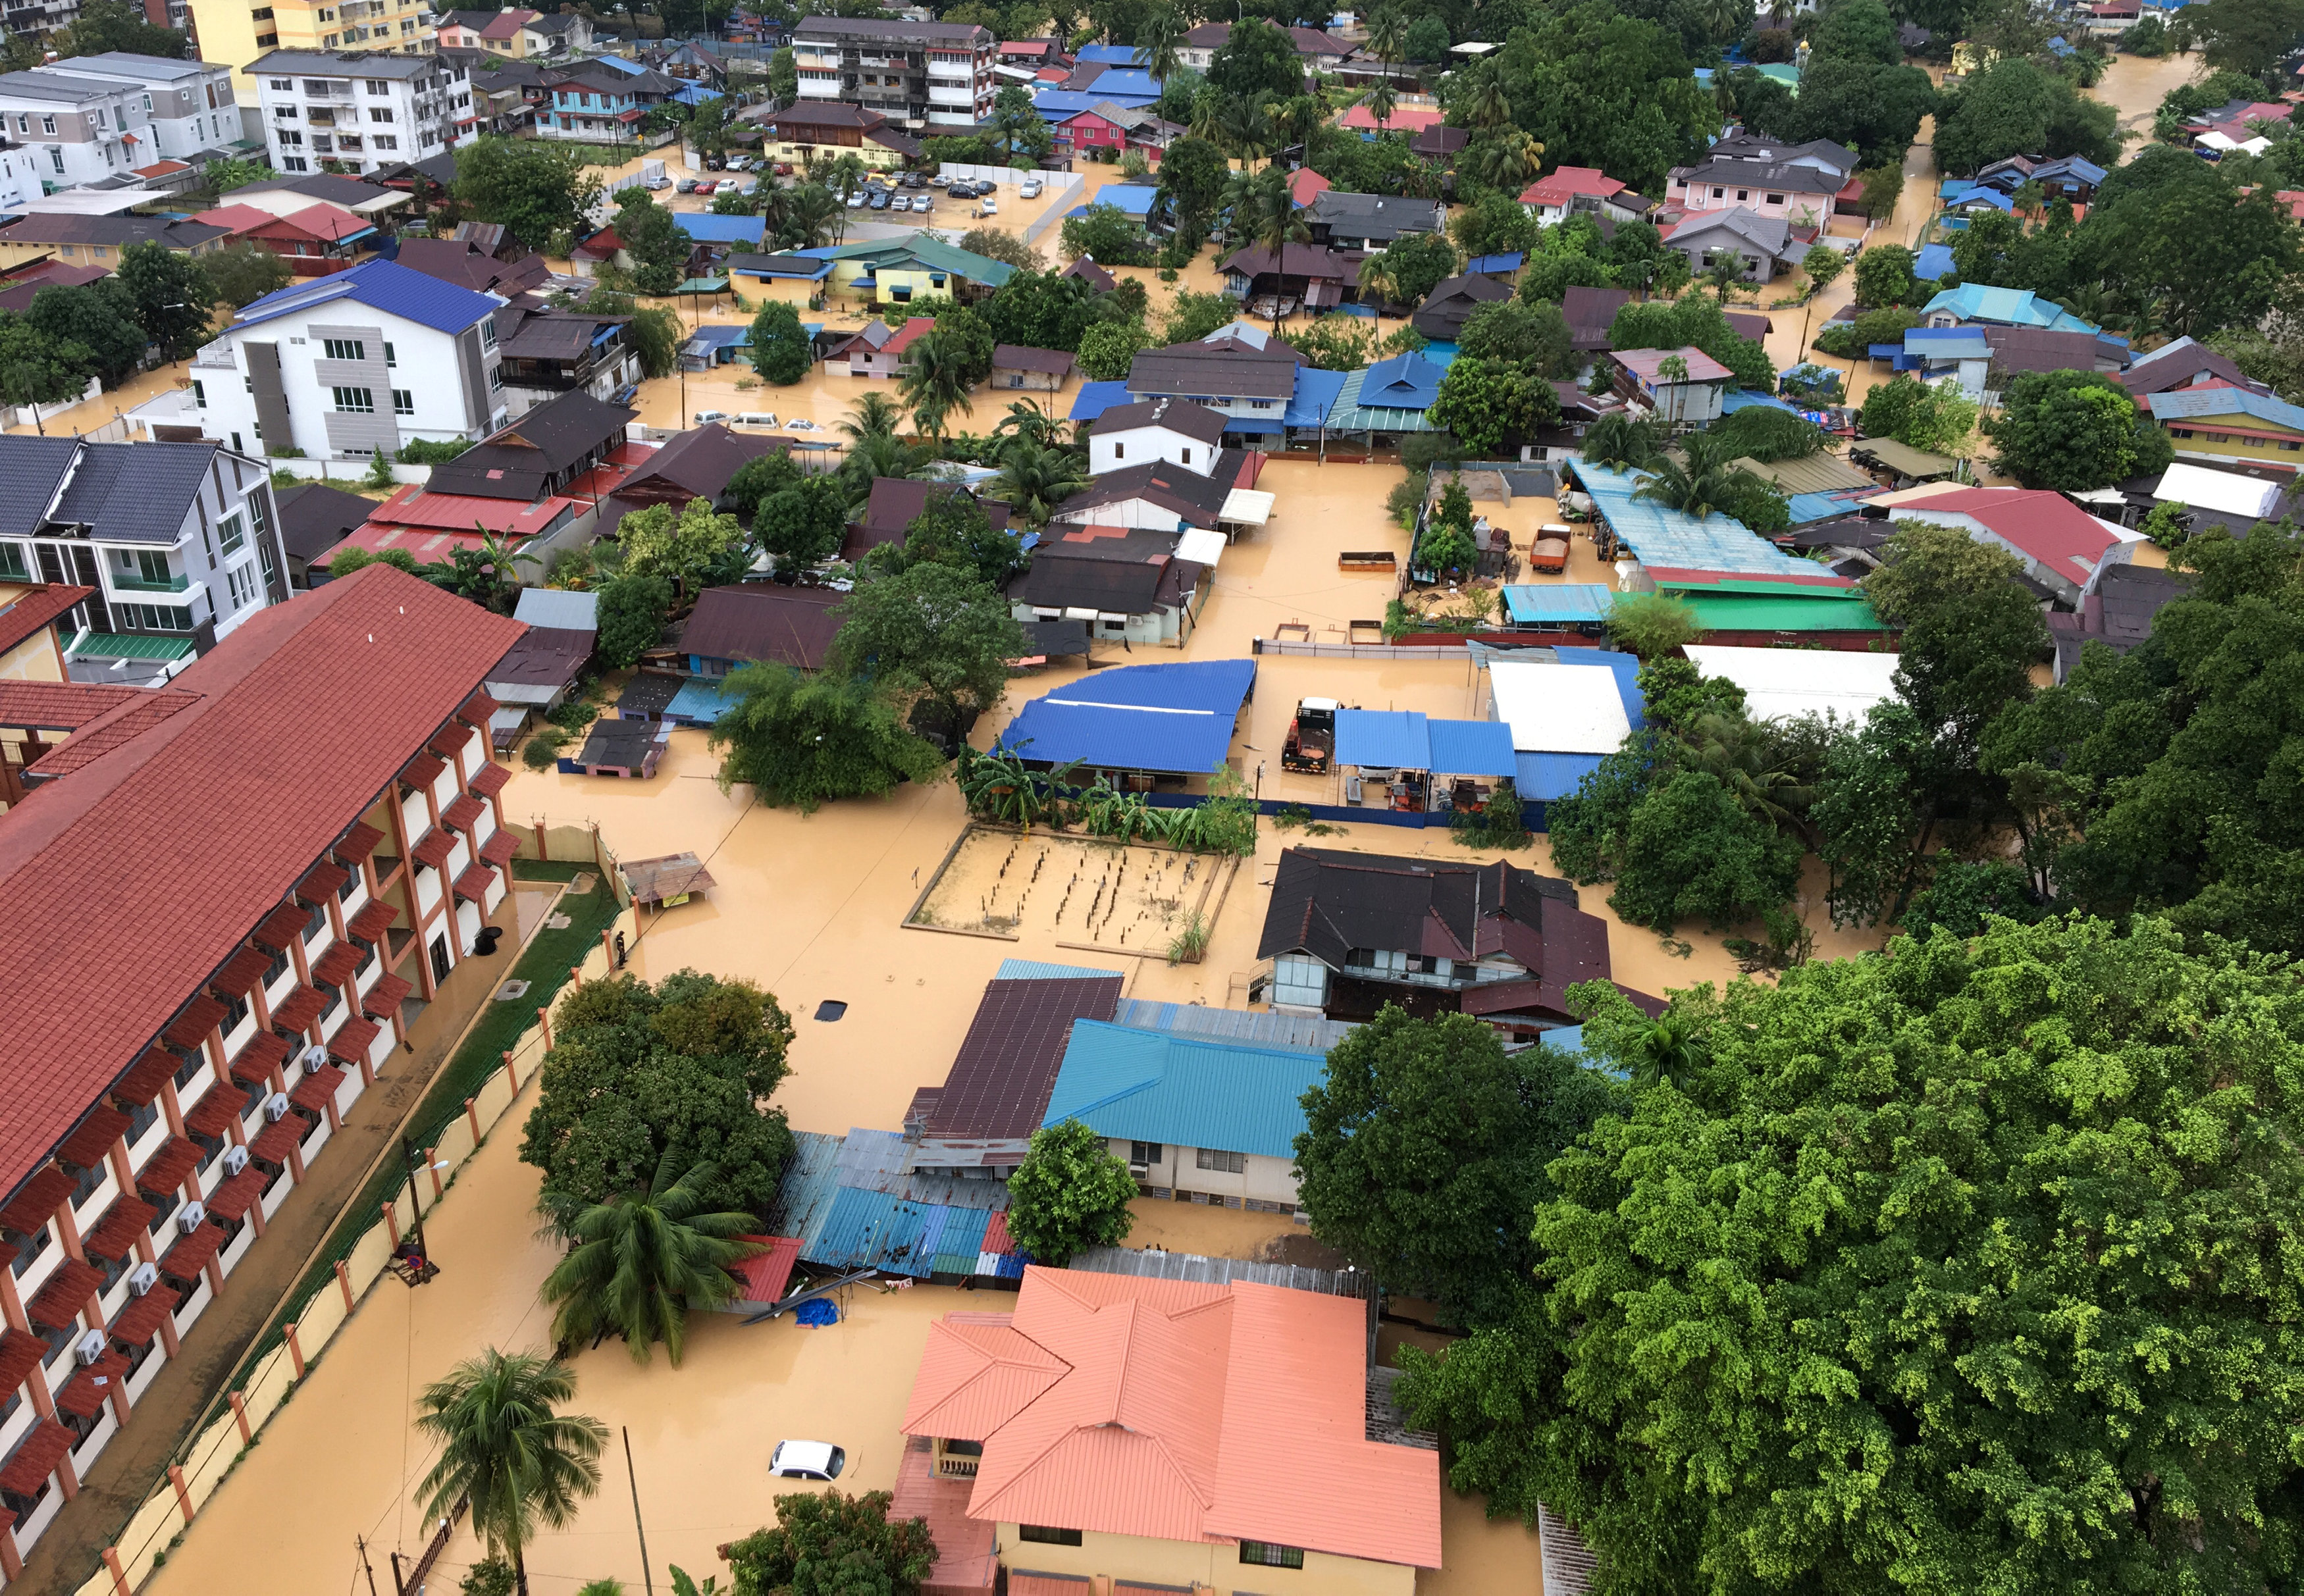 In pictures: Floods displace thousands in Malaysia's Penang